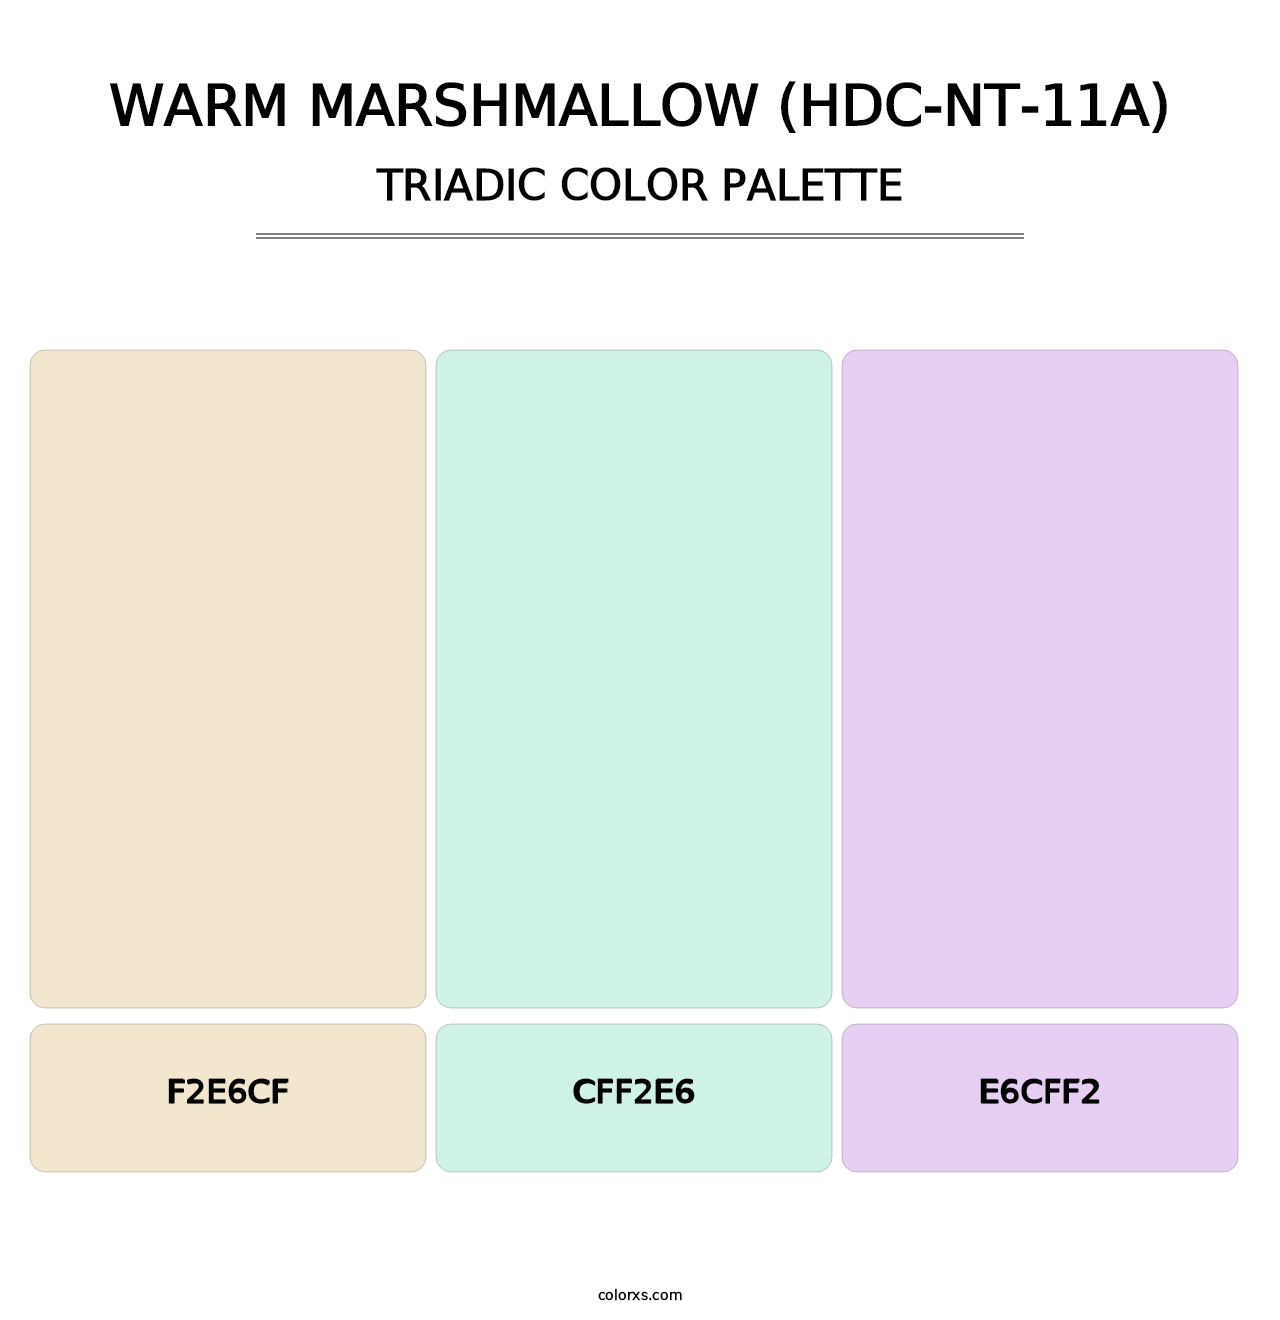 Warm Marshmallow (HDC-NT-11A) - Triadic Color Palette